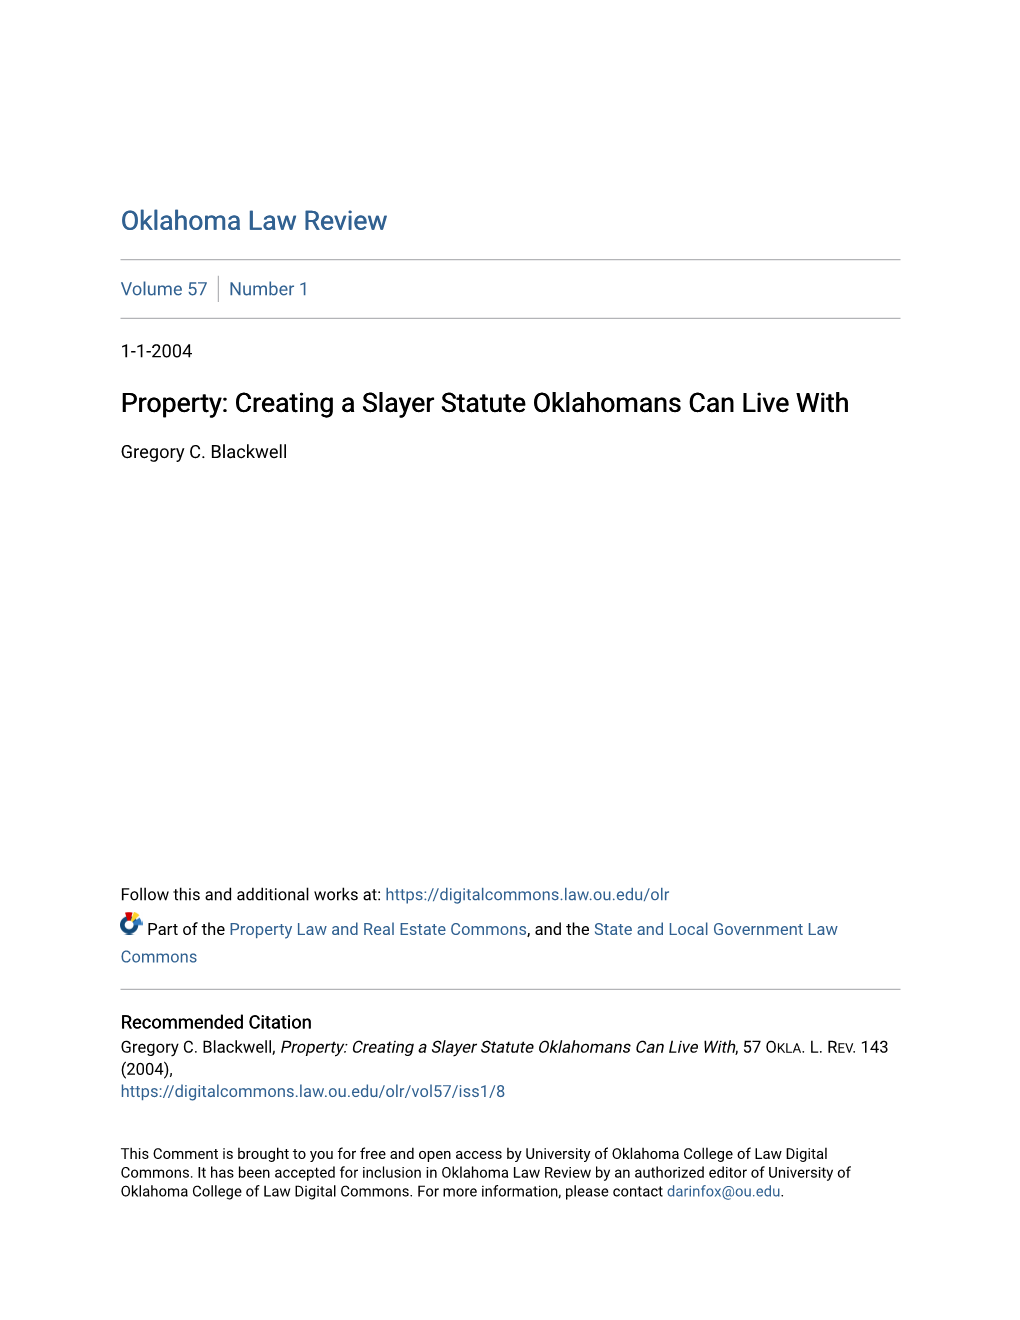 Property: Creating a Slayer Statute Oklahomans Can Live With